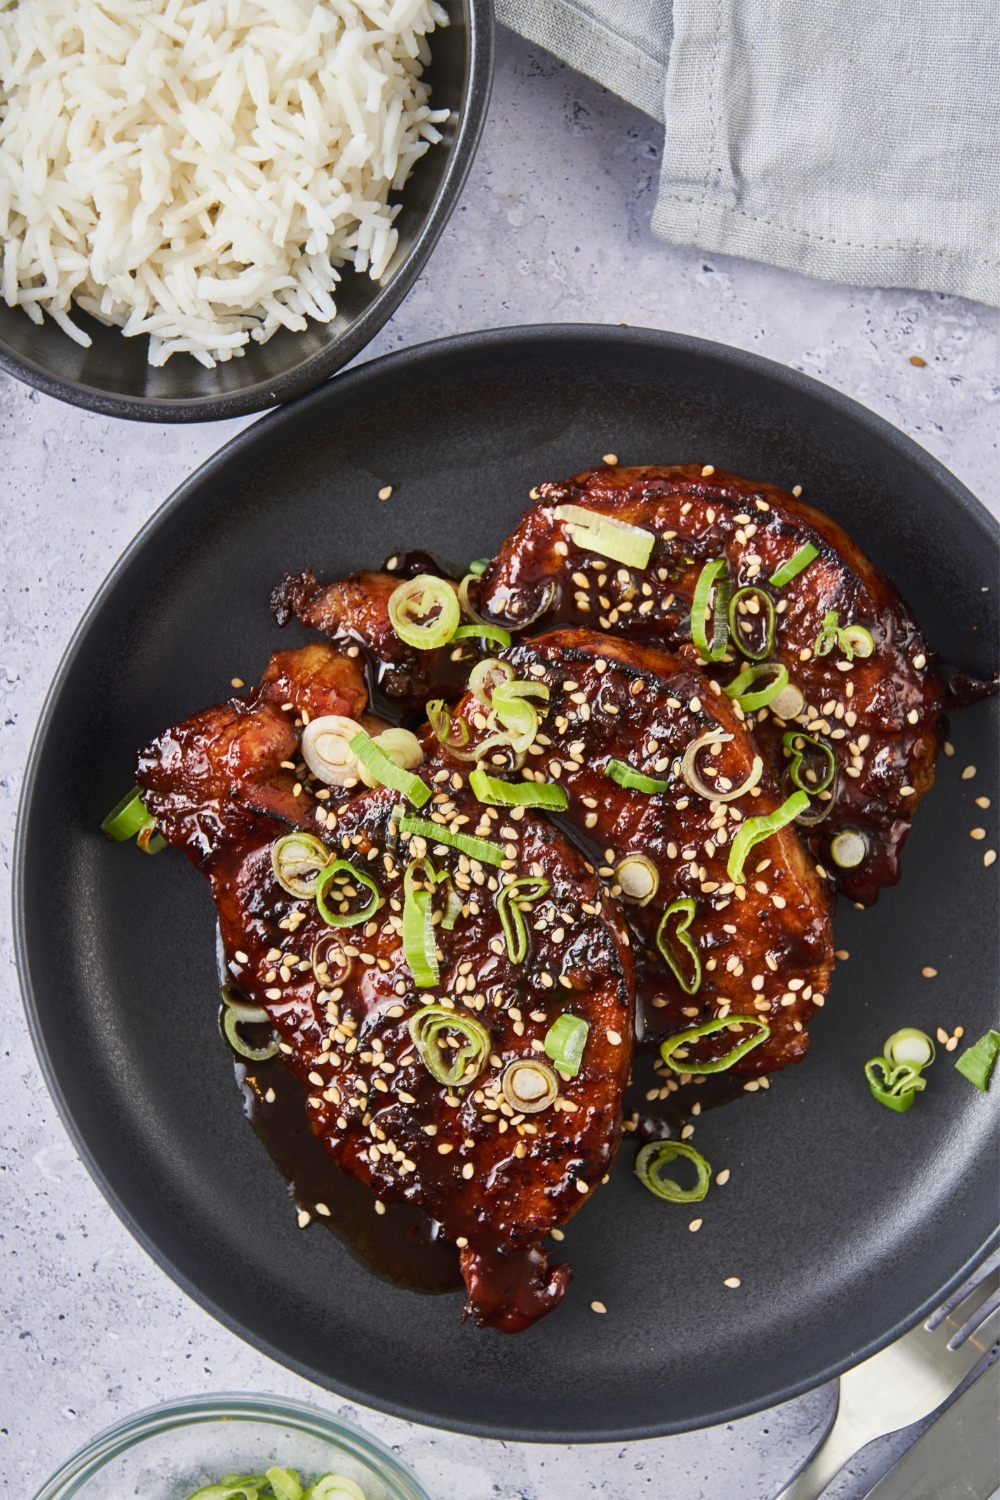 Top view of a plate of Korean pork chops garnished with chopped green onions and sesame seeds and served with a side of white rice.